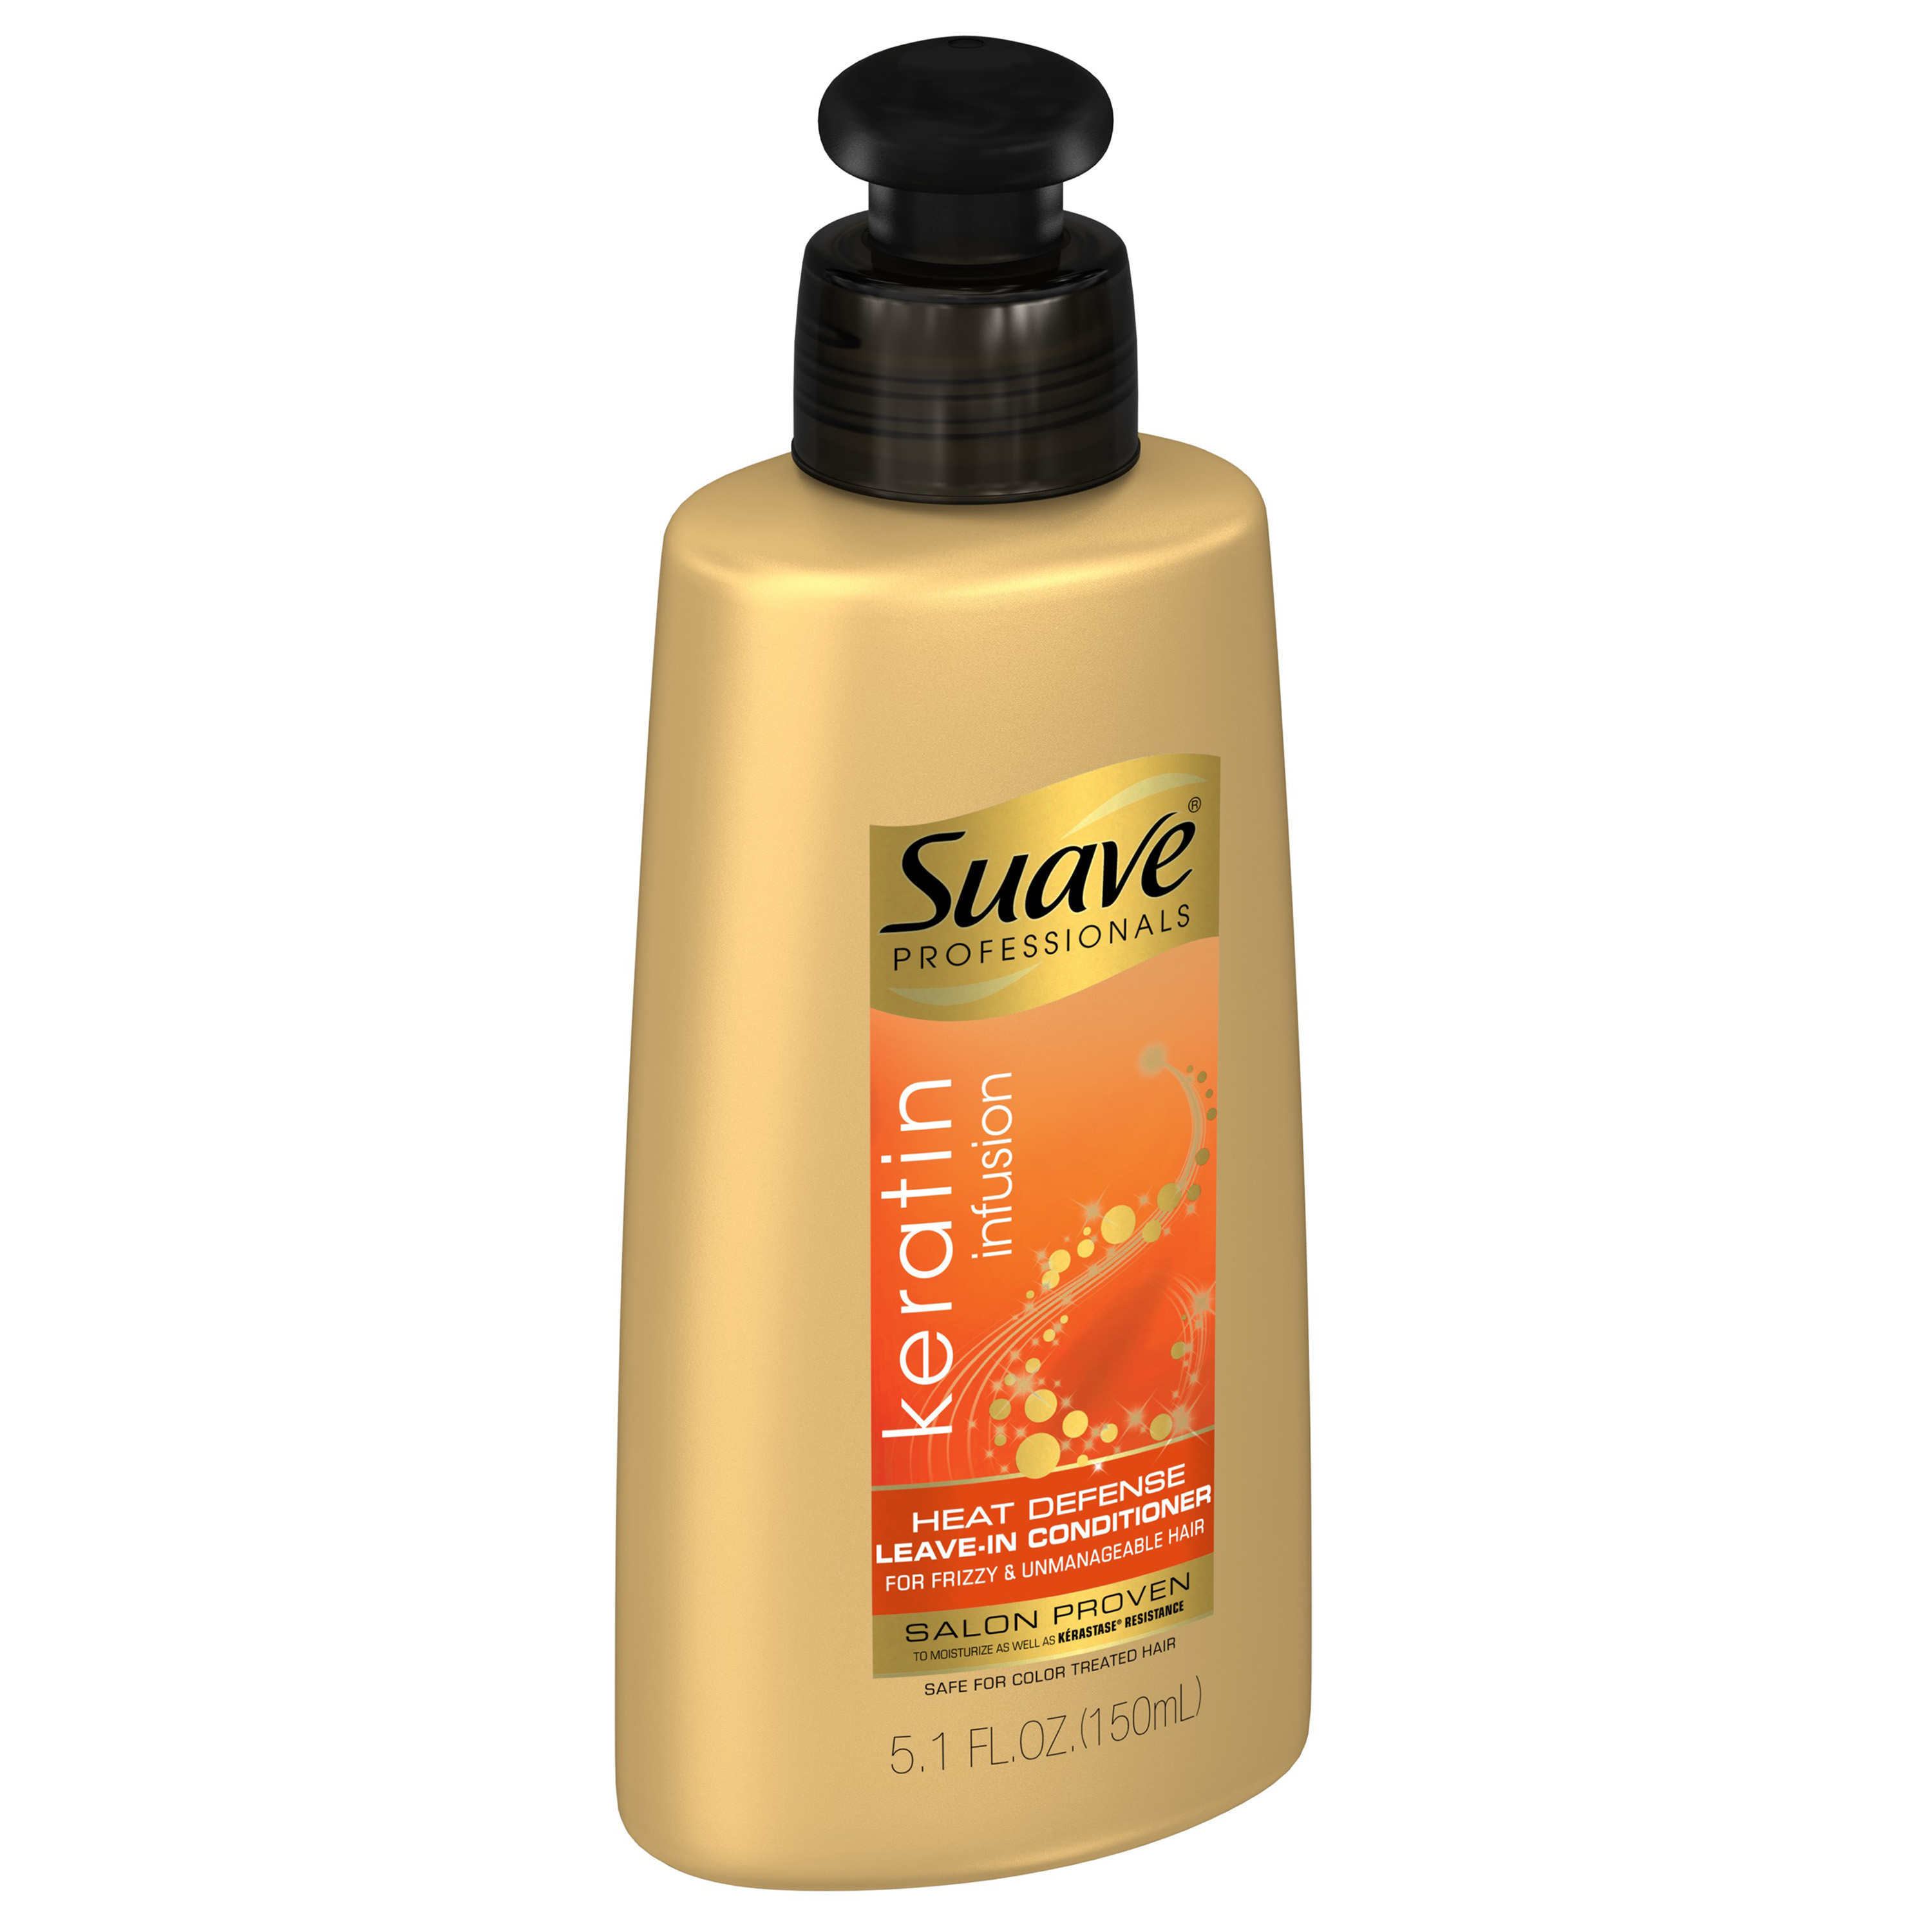 Suave Keratin Infusion Heat Defense Leave-in Conditioner 5.1 fl oz - image 5 of 5